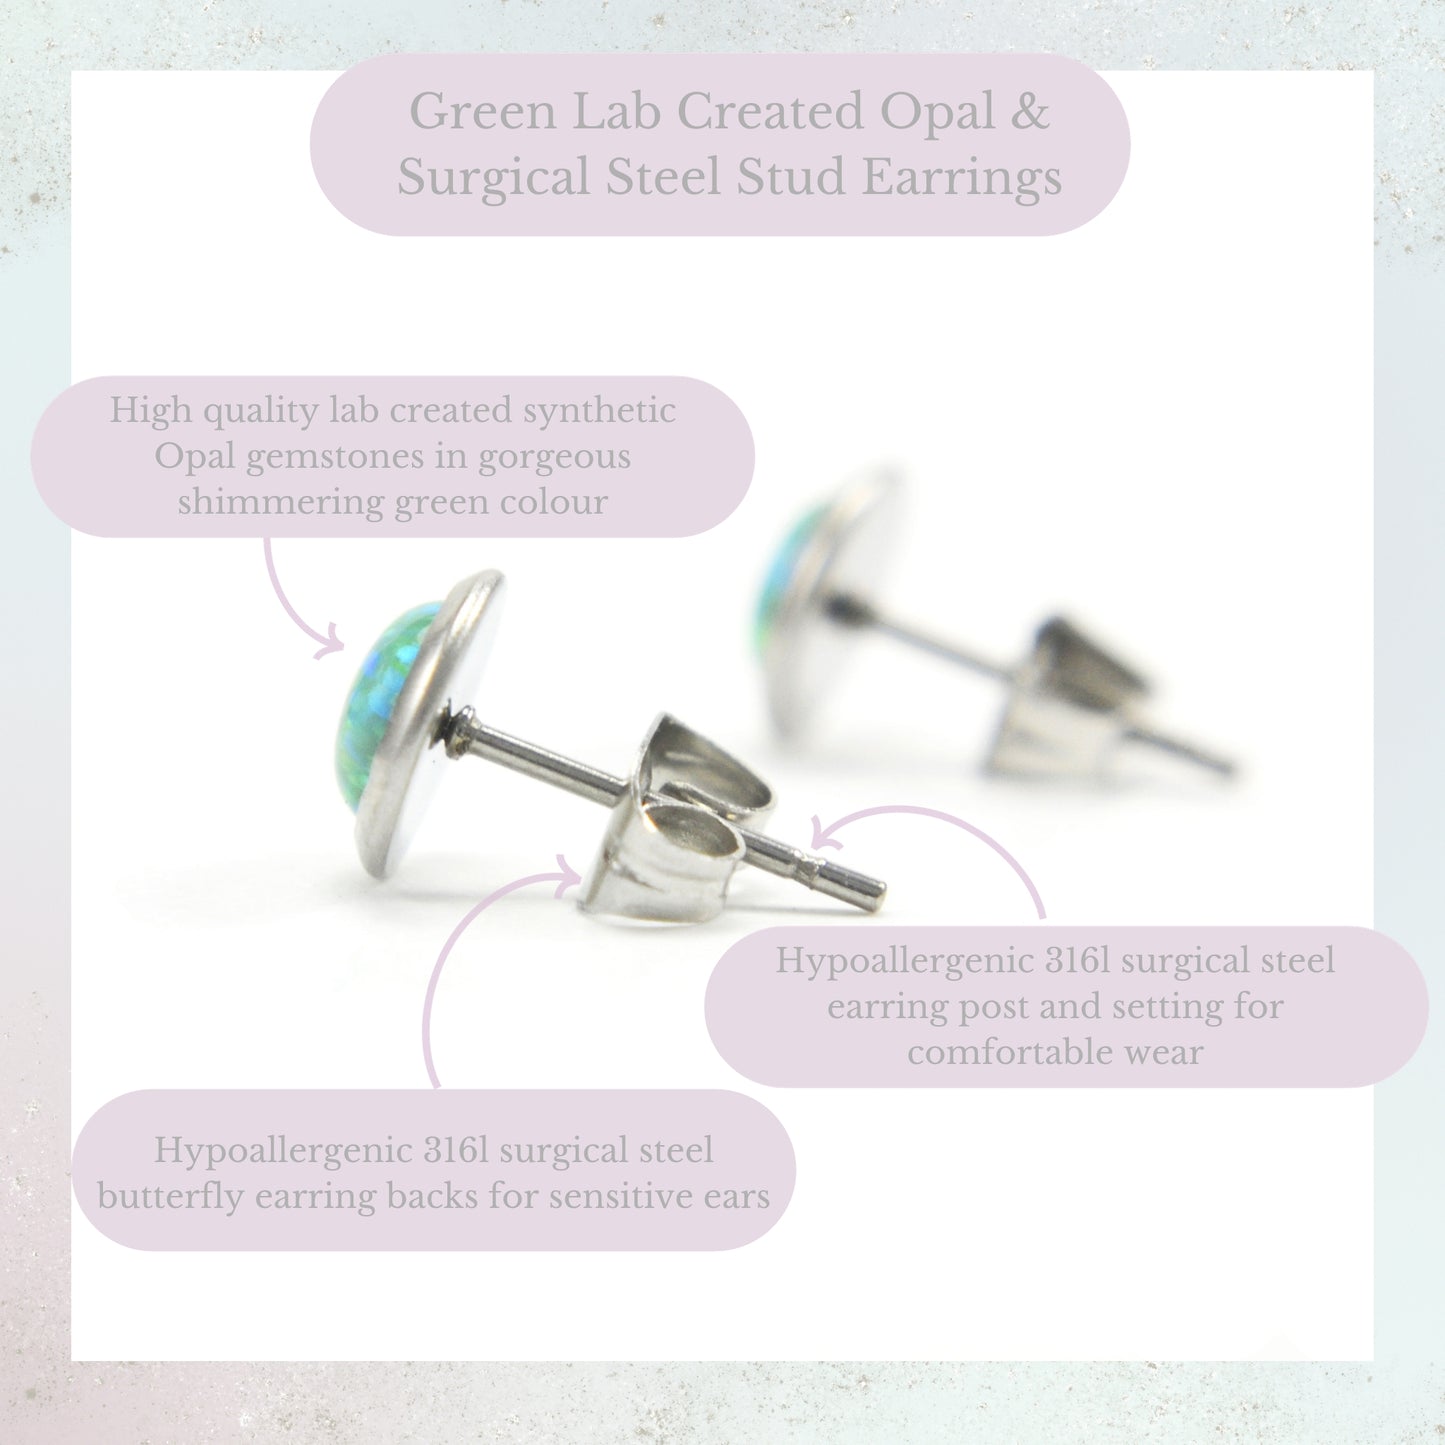 Green Lab Created Opal & Surgical Steel Stud Earrings Product Information Graphic